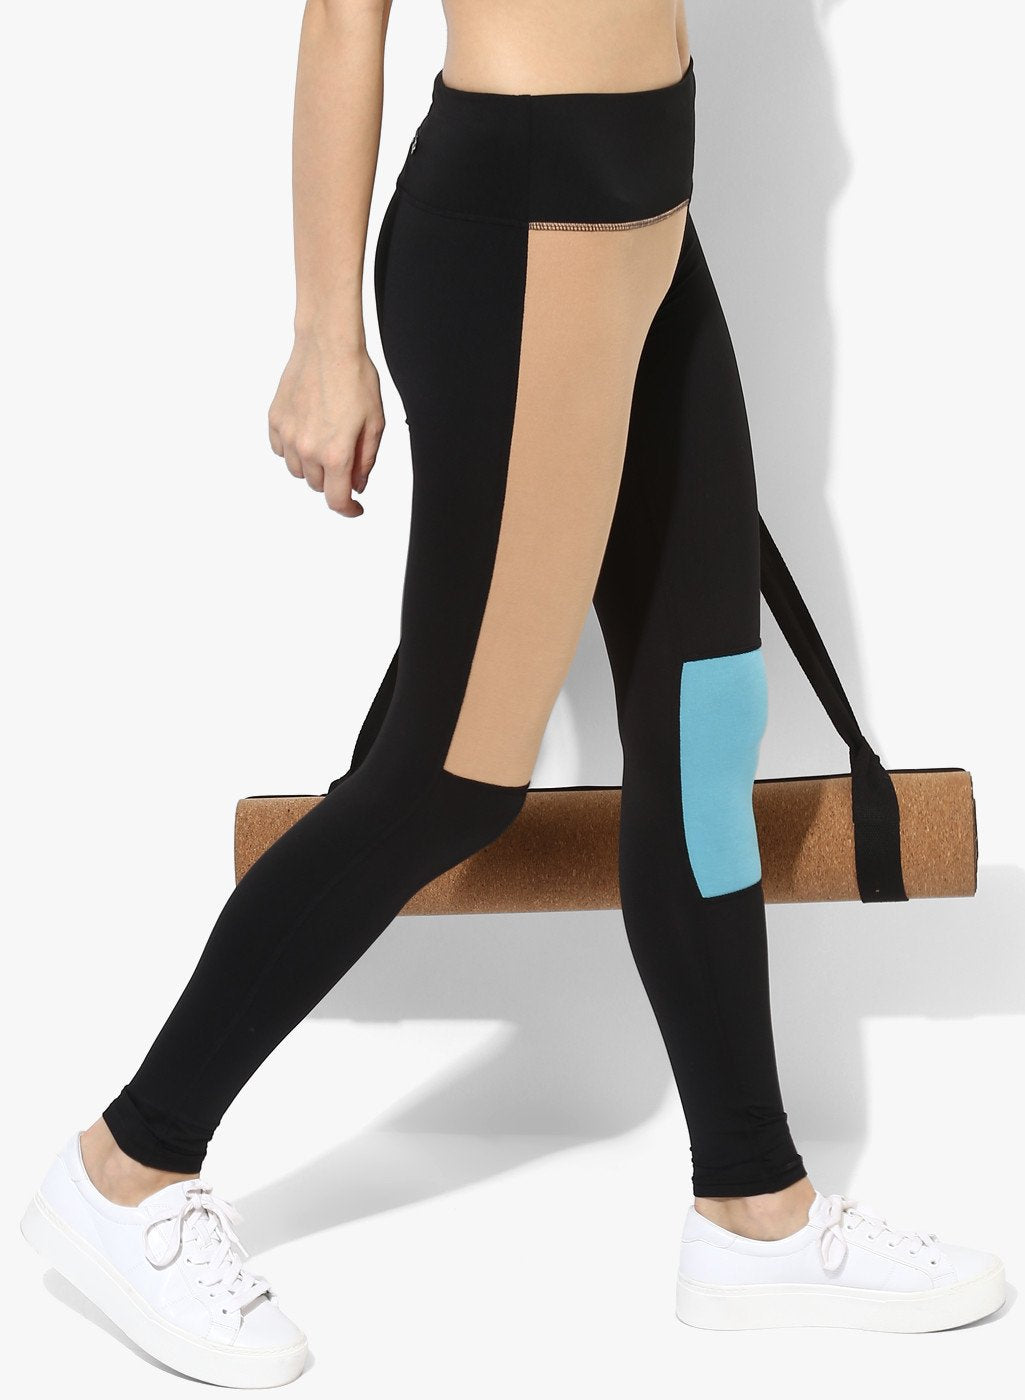 Our Top Leggings to Hide Cellulite - Lili Warrior